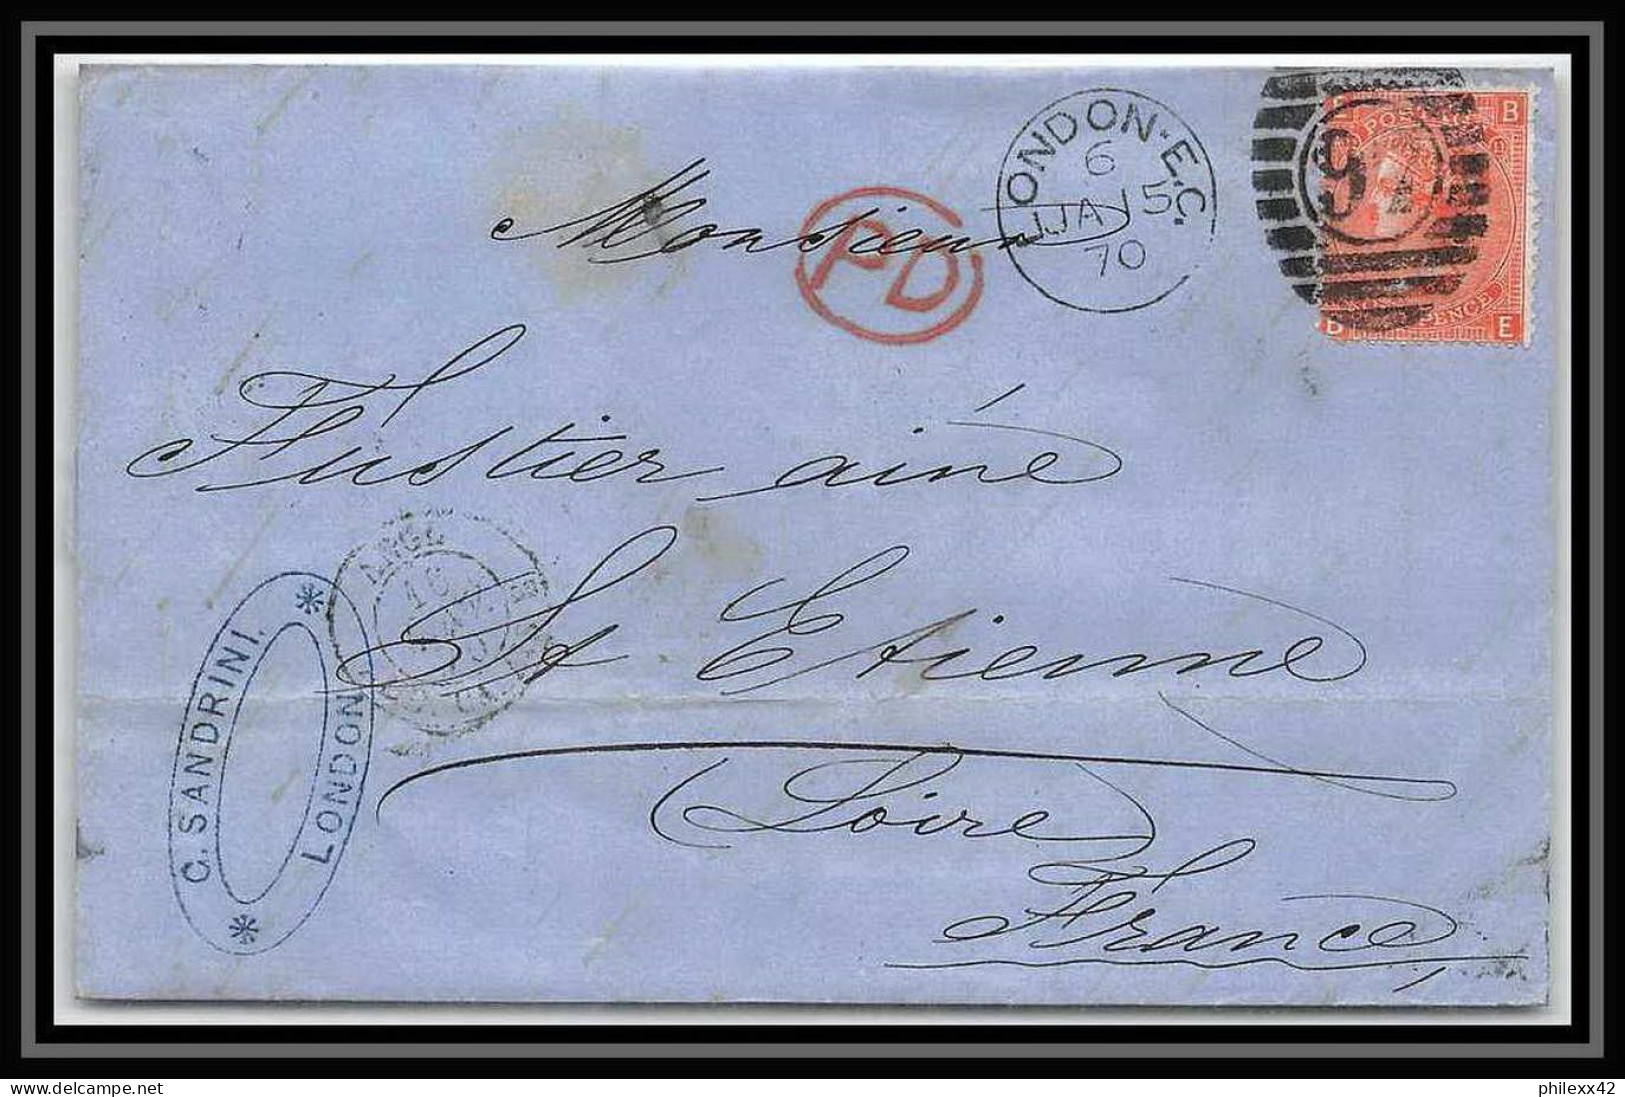 35811 N°32 Victoria 4p Red London St Etienne France 1870 Cachet 97 Lettre Cover Grande Bretagne England - Covers & Documents